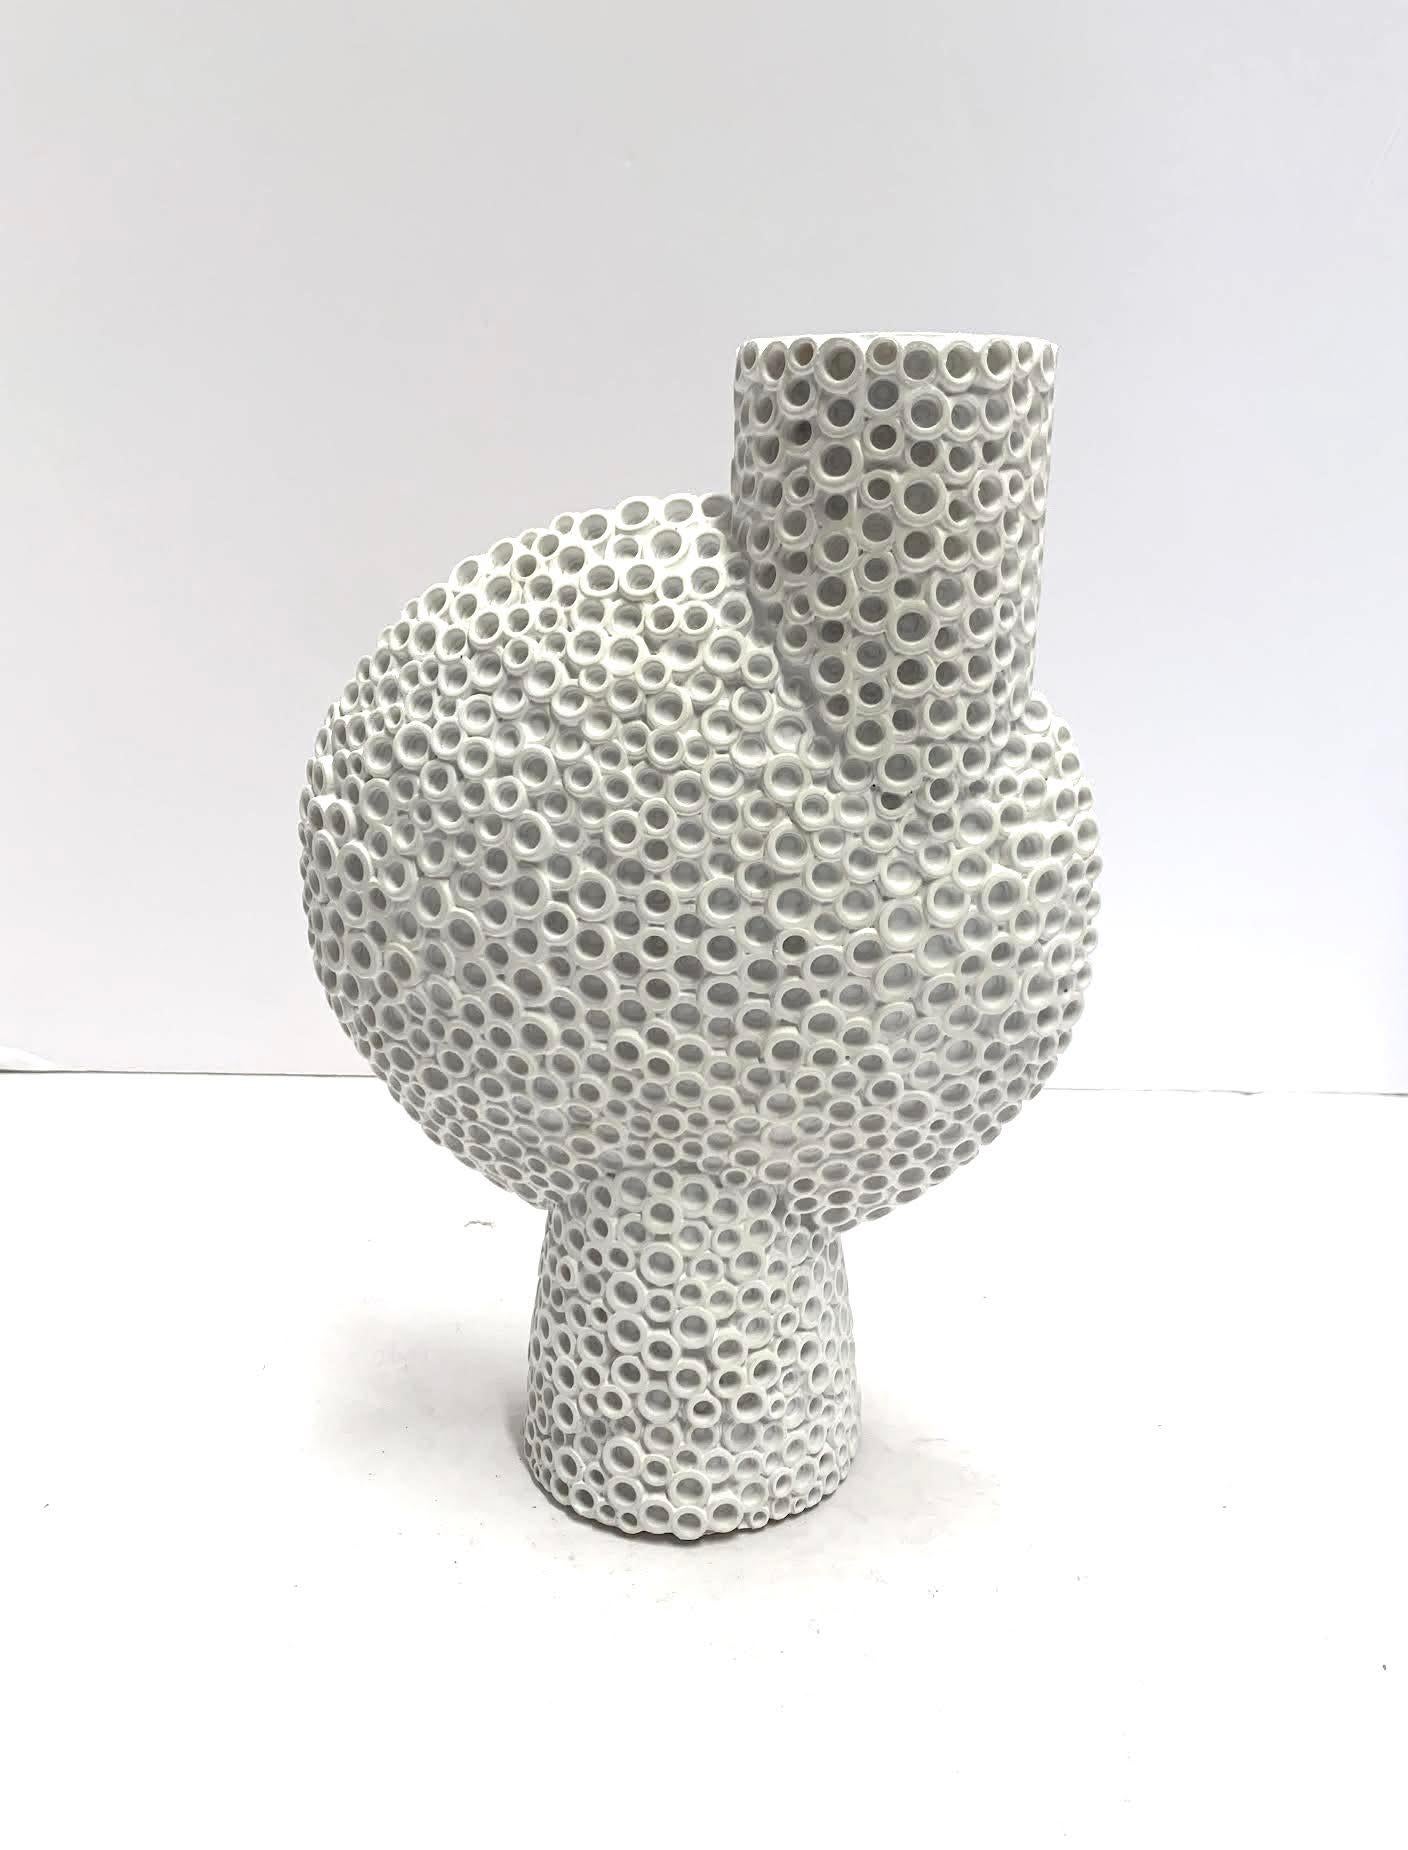 Contemporary Danish designed bone white off center vase.
Bold surface texture.
Part of a very large collection.